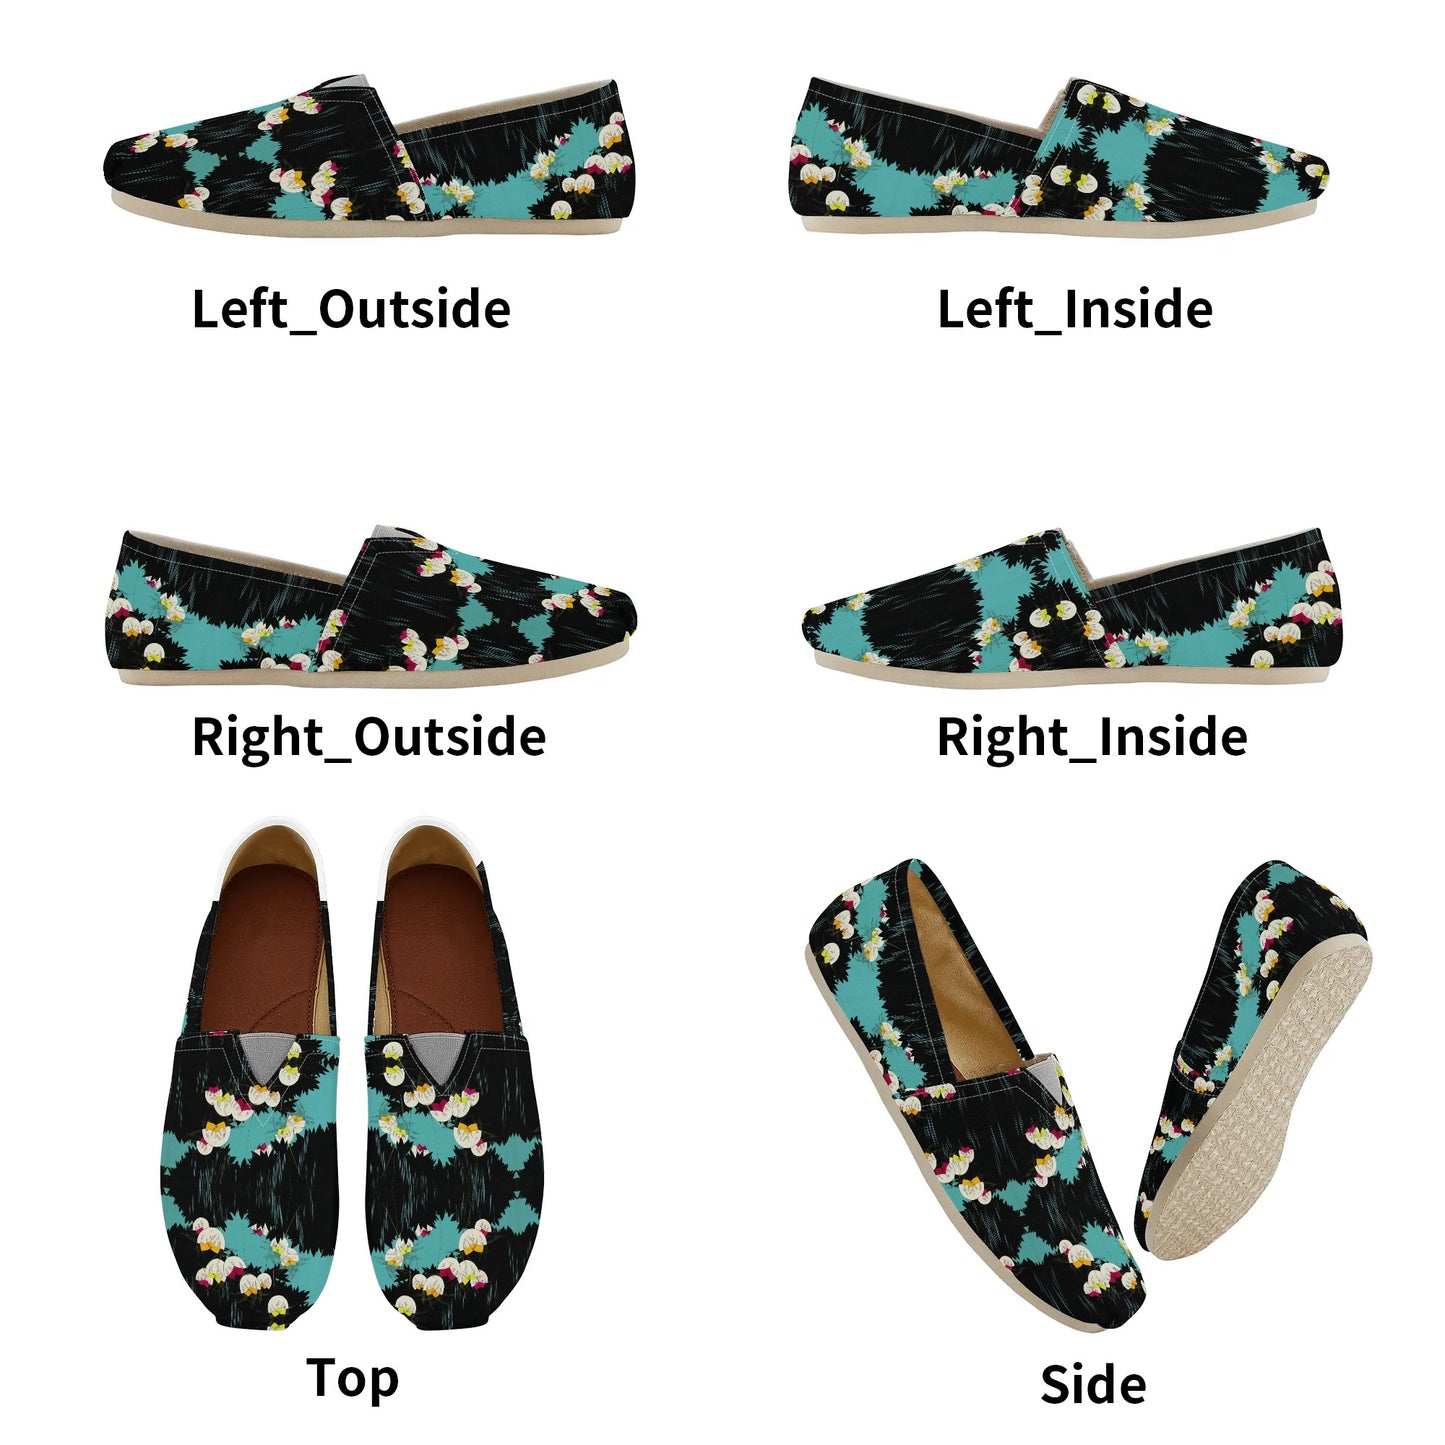 Black and Turquoise Floral Lilly of the Valley Art Deco Womens Casual Slip-on Shoes